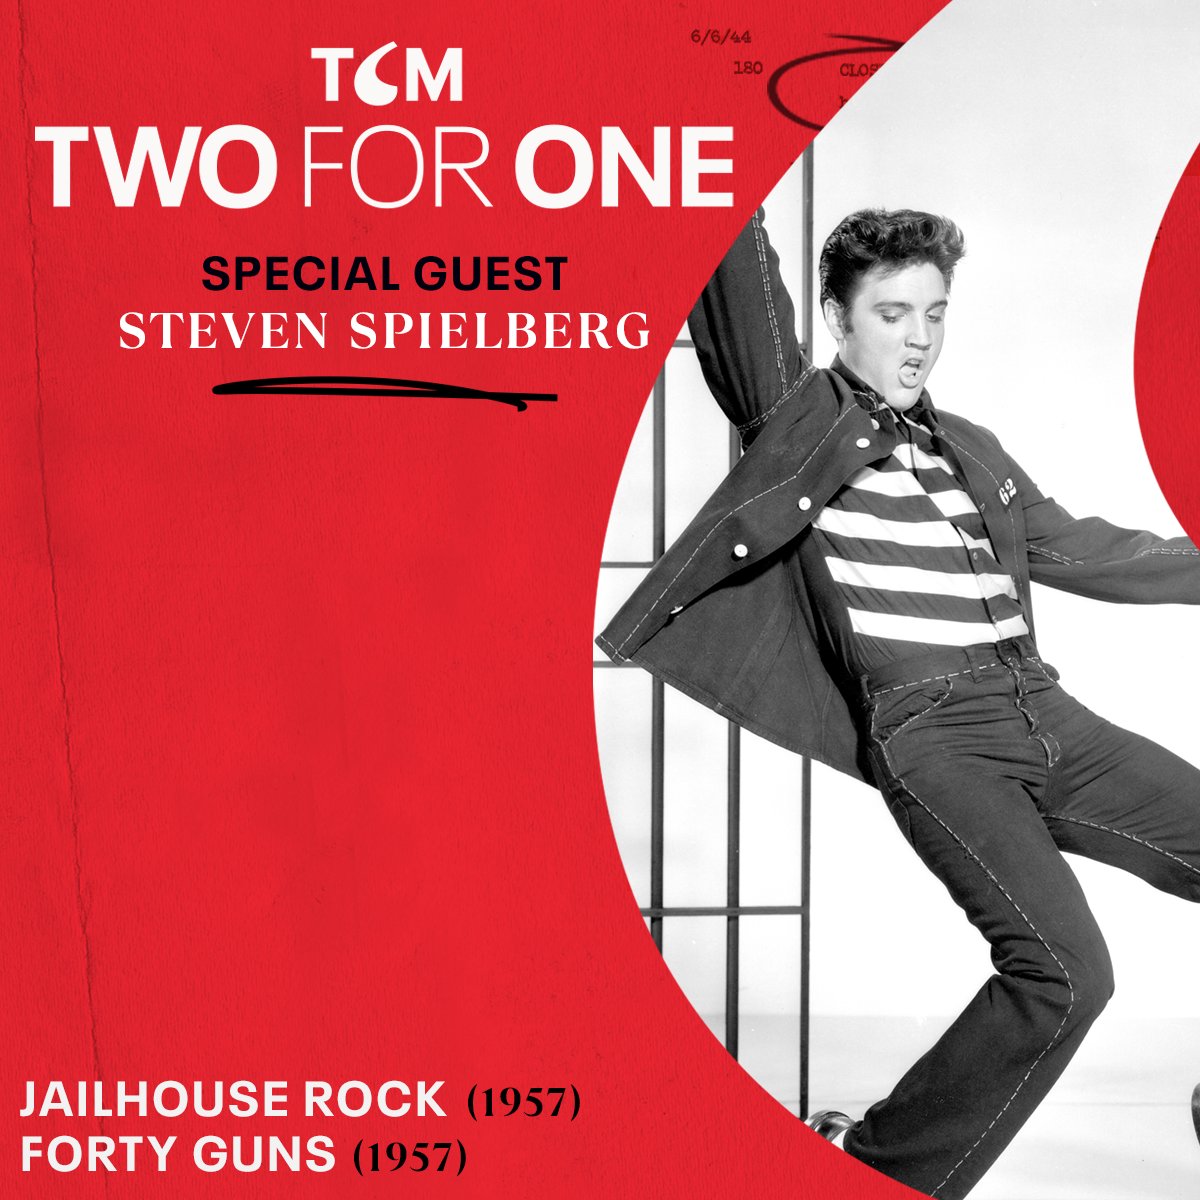 Tonight legendary filmmaker Steven Spielberg joins us to share what makes JAILHOUSE ROCK ('57) and FORTY GUNS ('57) his ultimate double-feature as part of our Two for One limited series. The conversation with @BenMank77 begins at 8pm ET. Learn more here: bit.ly/4atr2aR